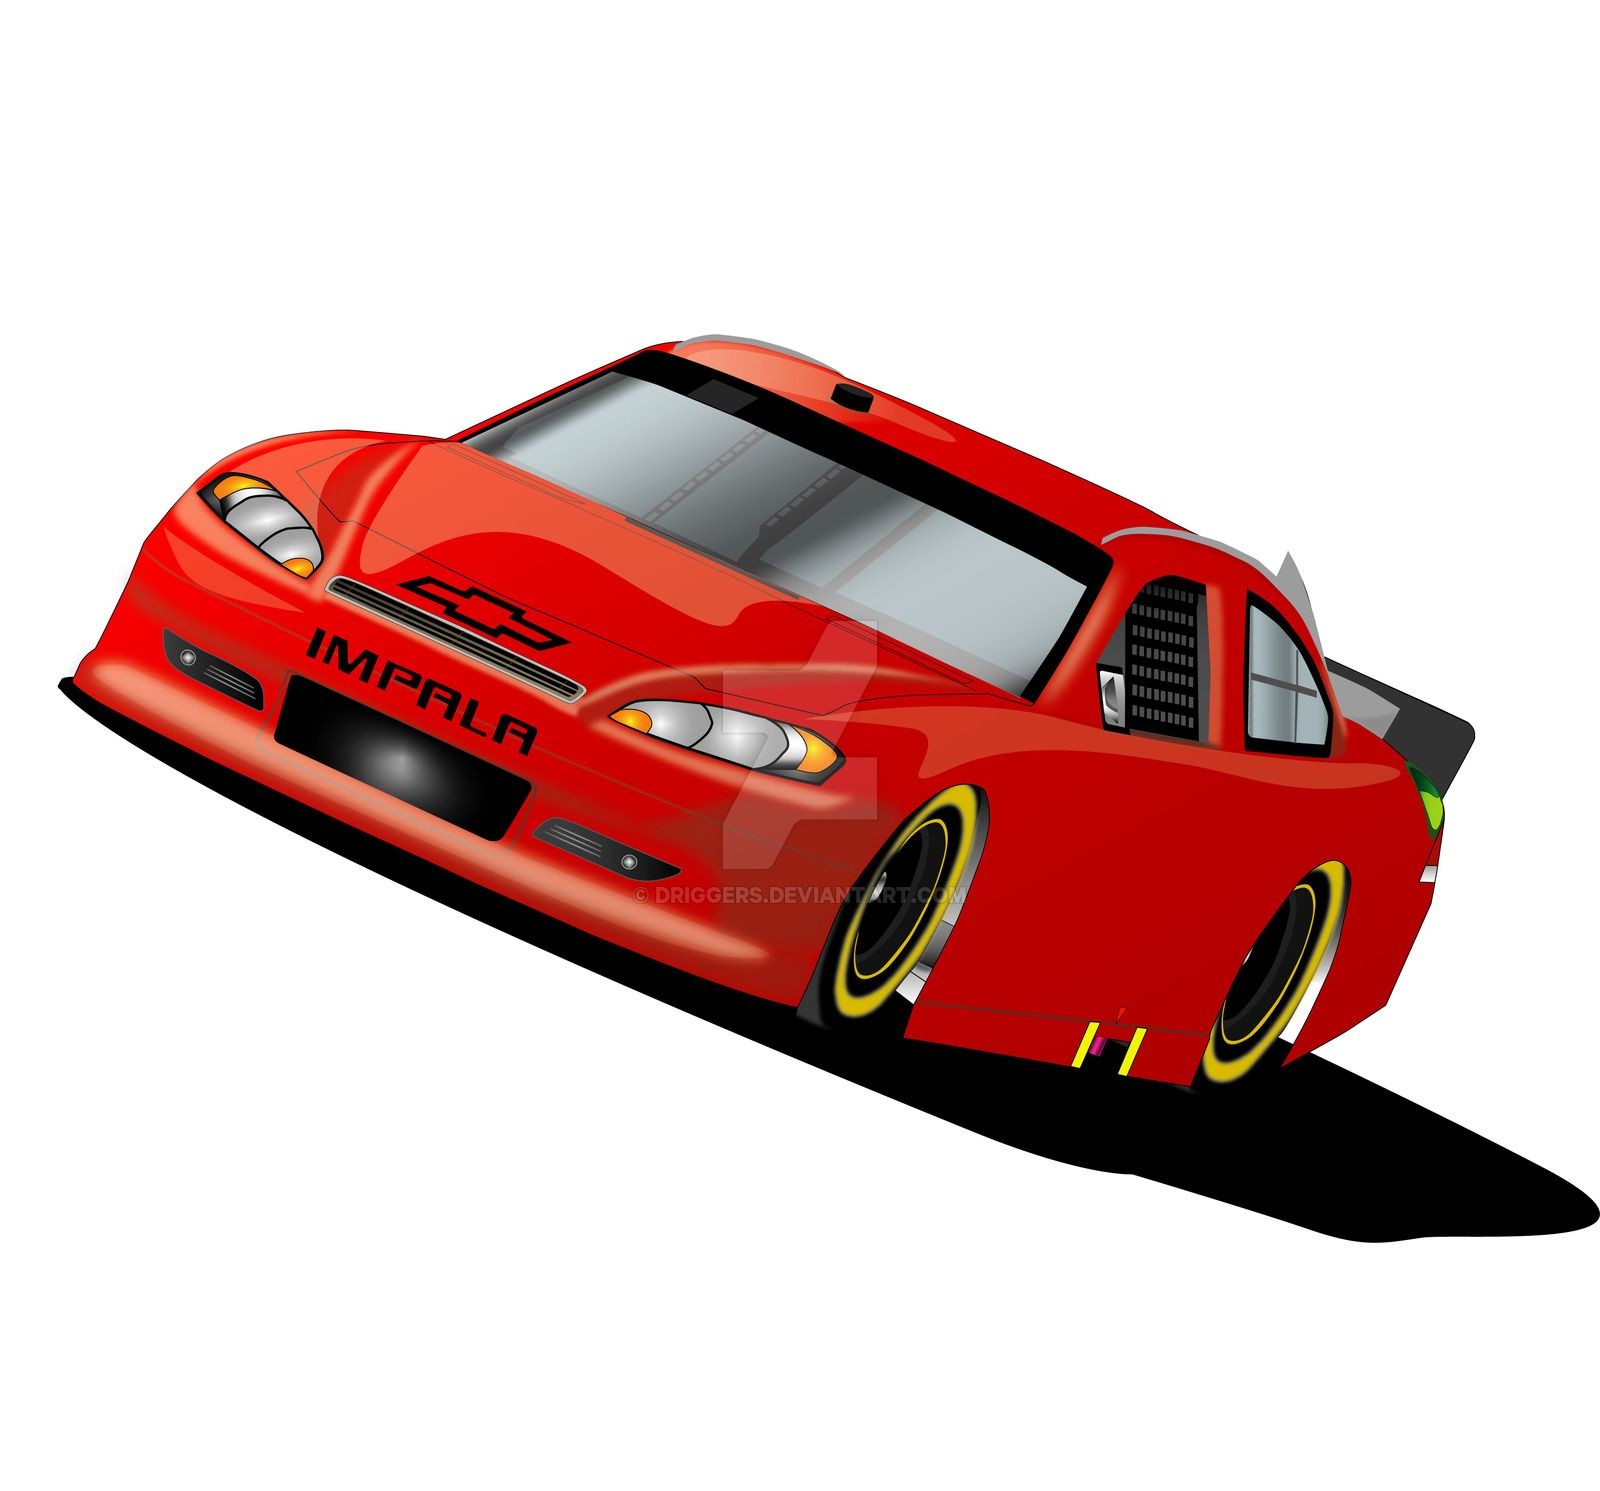 nascar clipart red